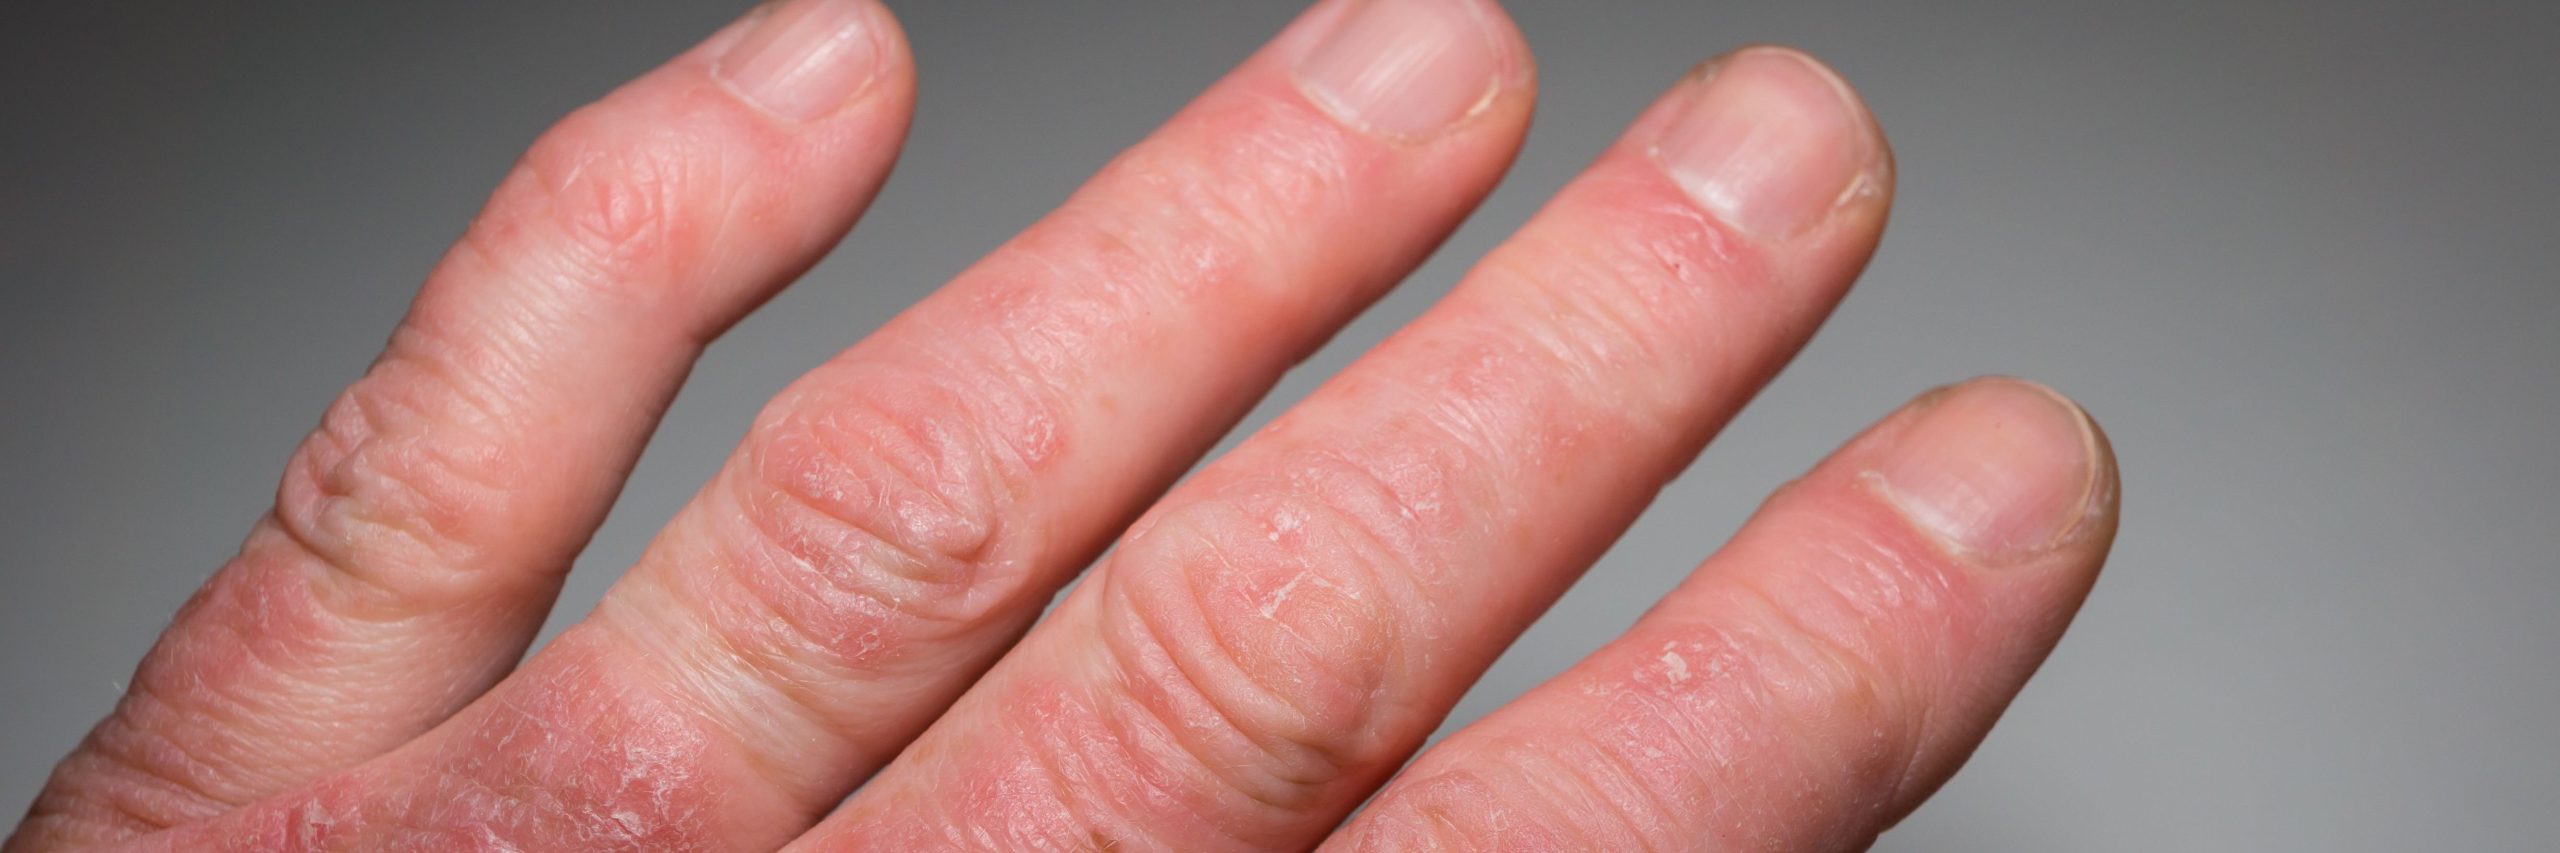 Coexistence of Psoriatic Arthritis and Atopic Dermatitis Offers Treatment Insights